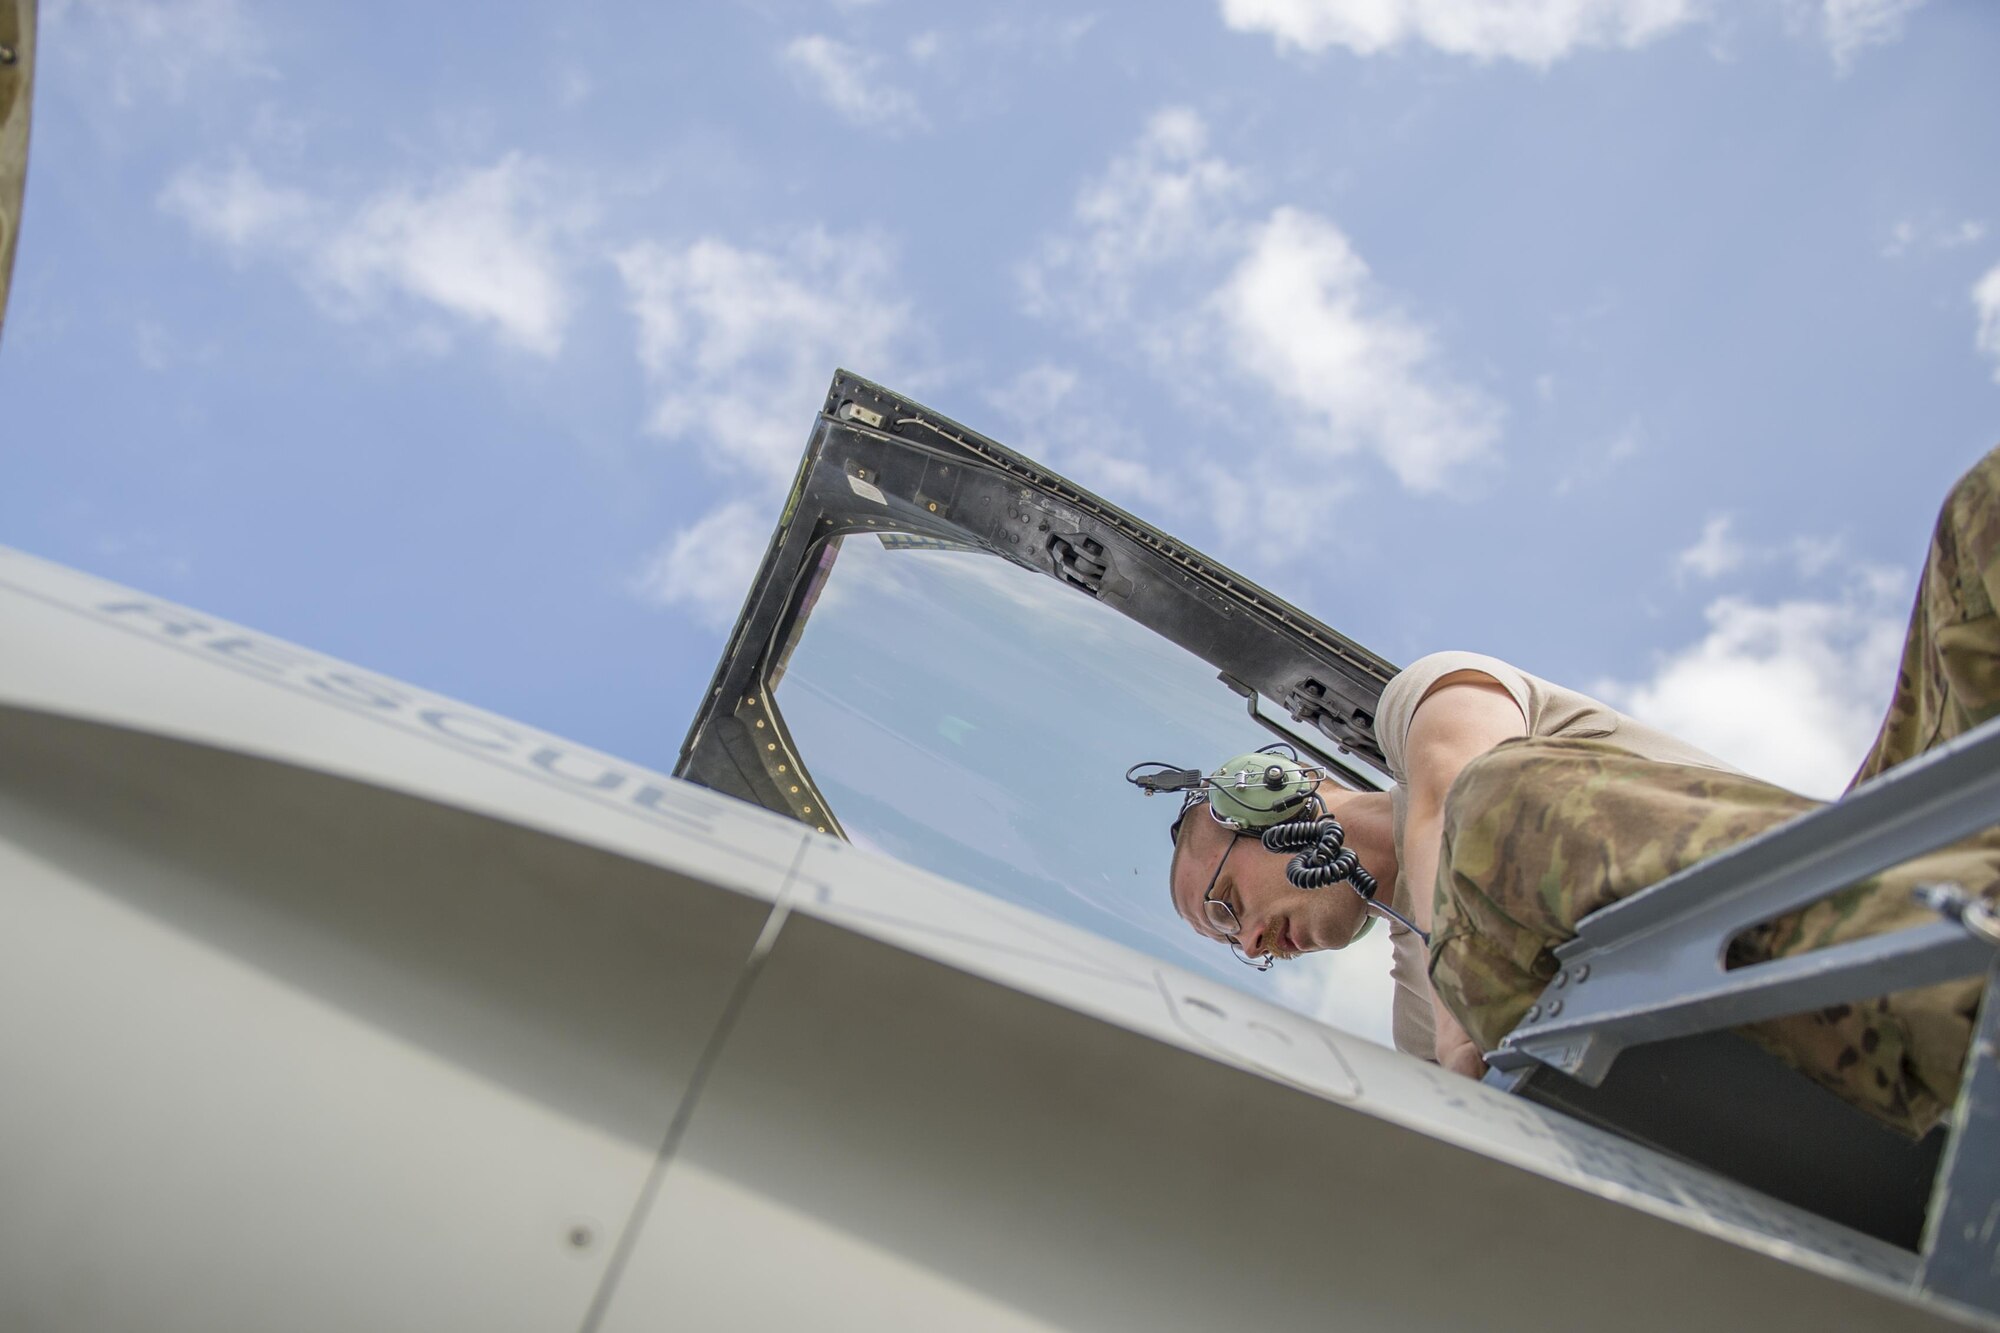 Staff Sgt. Brendan Lee, 455th Expeditionary Aircraft Maintenance Squadron avionics technician, deployed from Hill Air Force Base, Utah, climbs to the cockpit of an F-16 Fighting Falcon to troubleshoot a faulty radar module at Bagram Airfield, Afghanistan, Nov. 30, 2015. The squadron provides combat-ready aircraft to the air component commander in support of coalition forces throughout Afghanistan. (U.S. Air Force Photo by Tech. Sgt. Robert Cloys/Released)